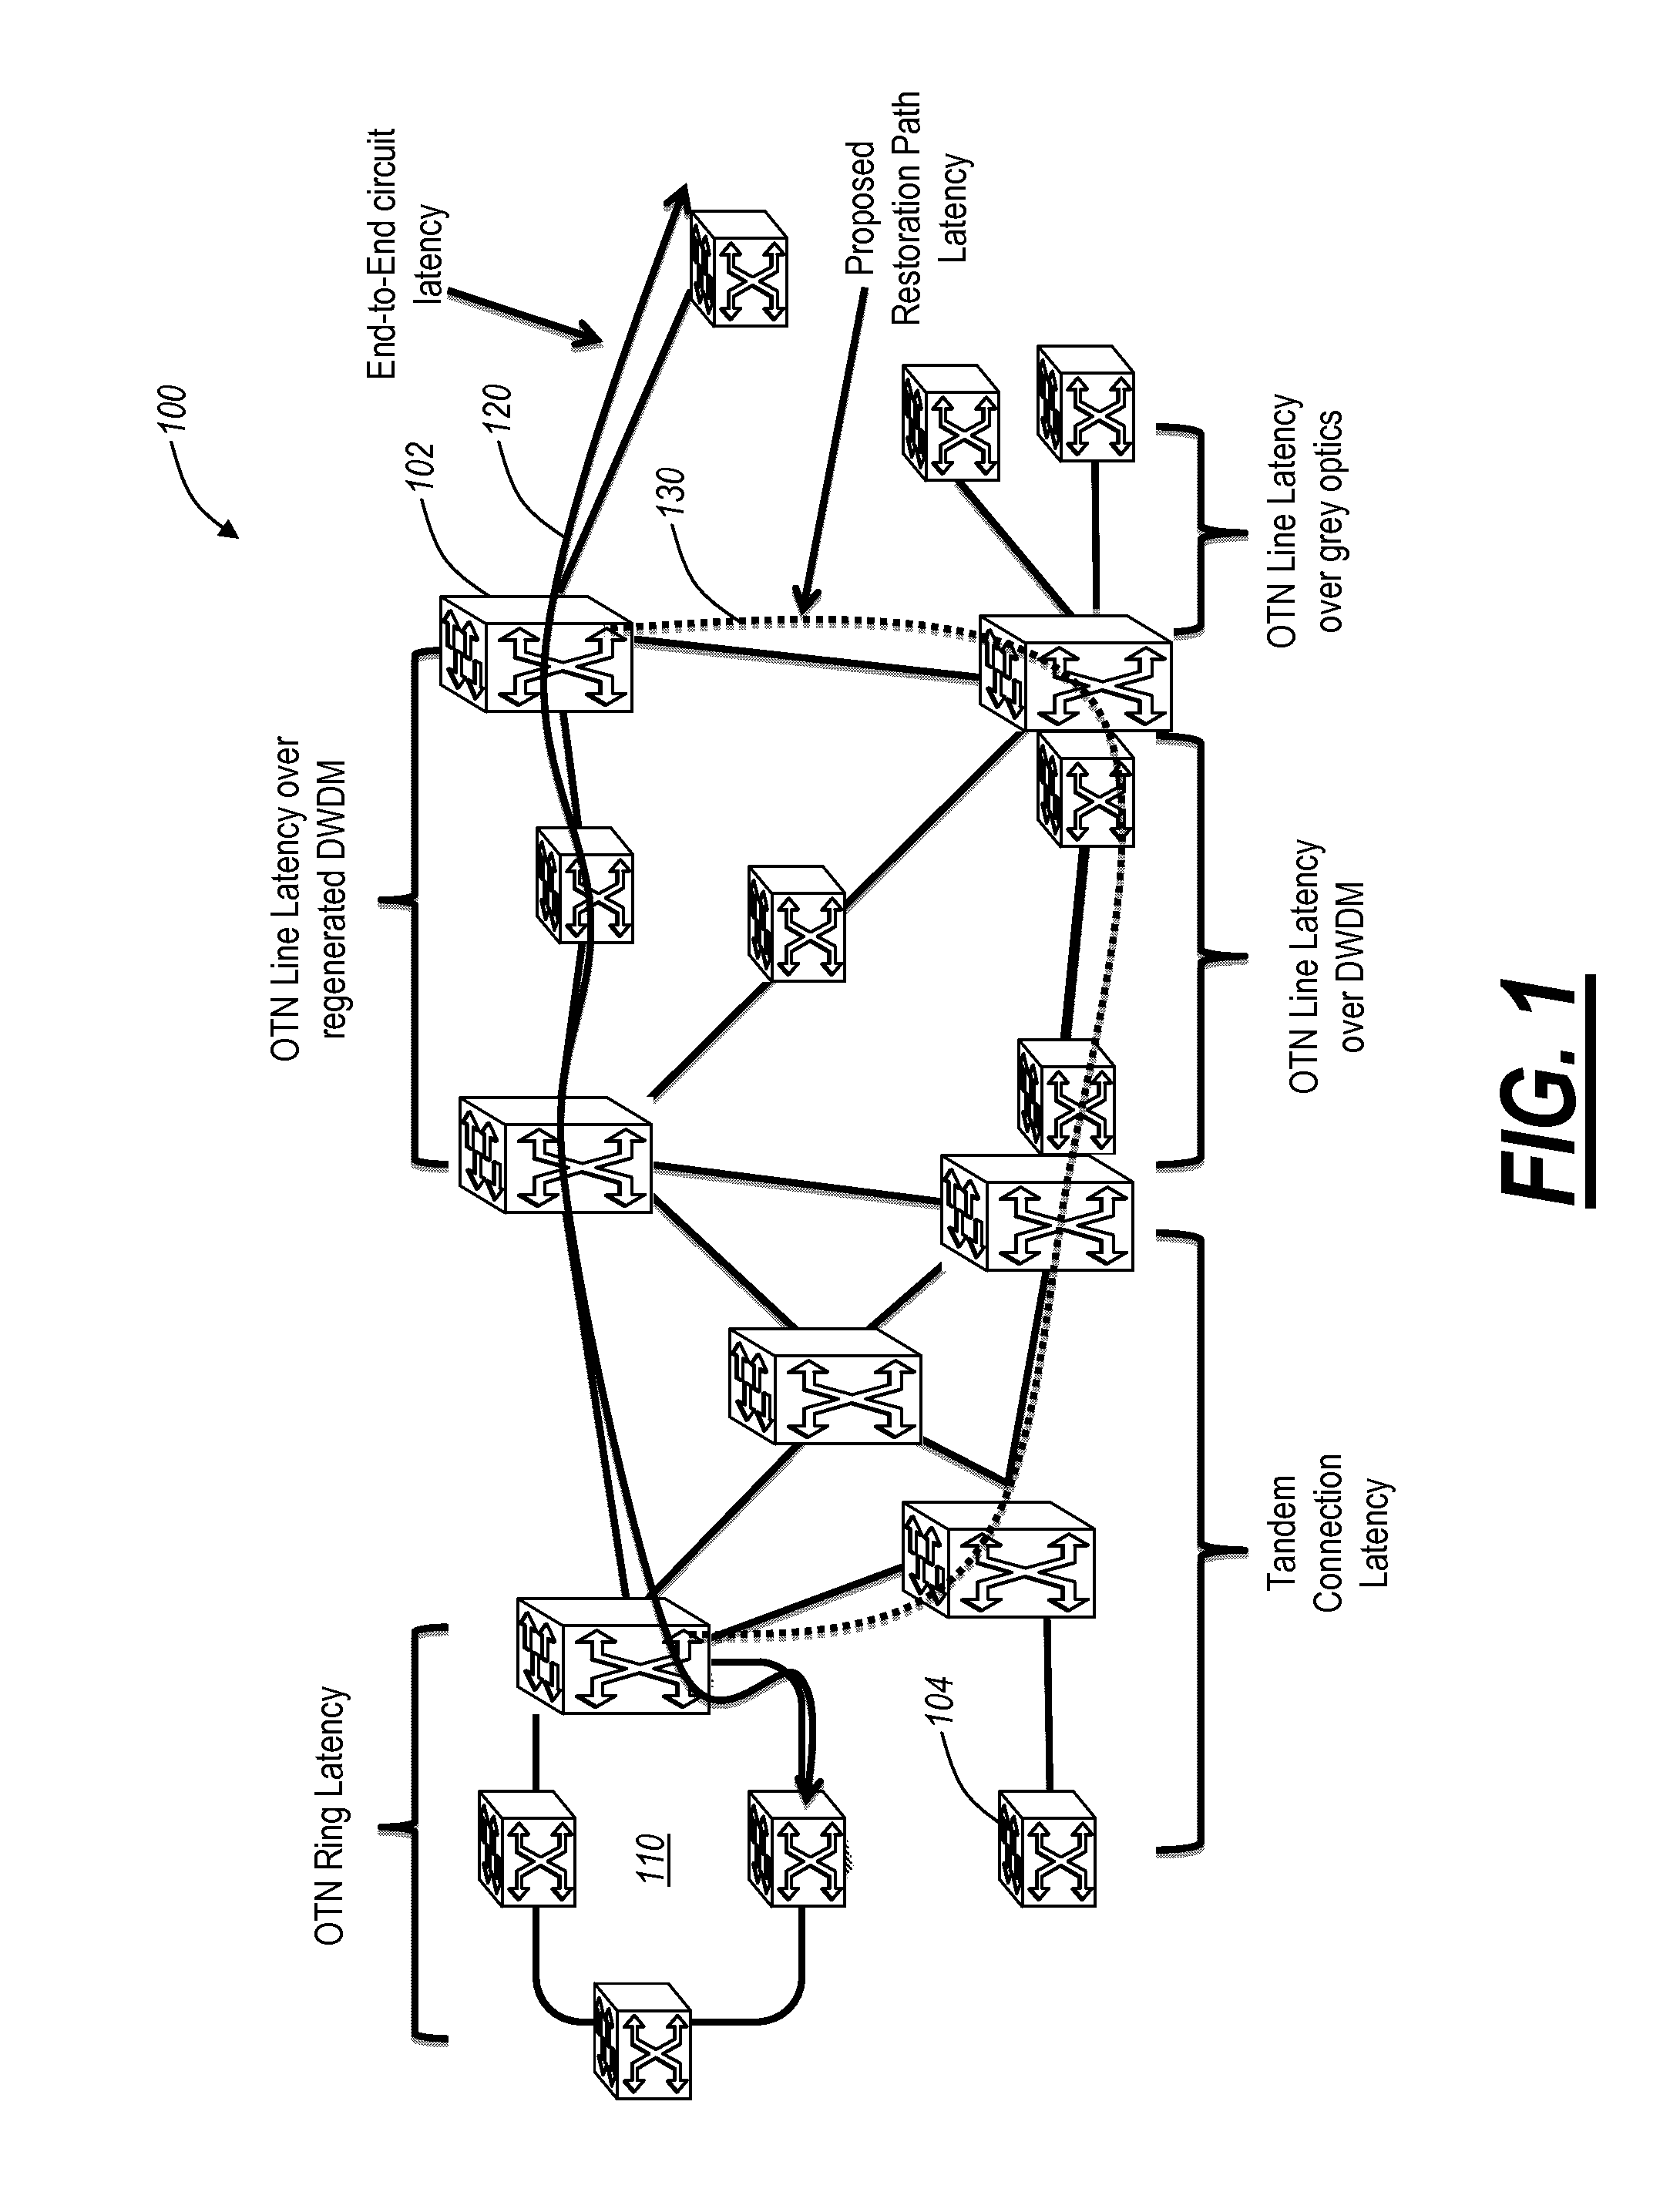 Systems and methods of measuring latency and routing thereon in optical networks